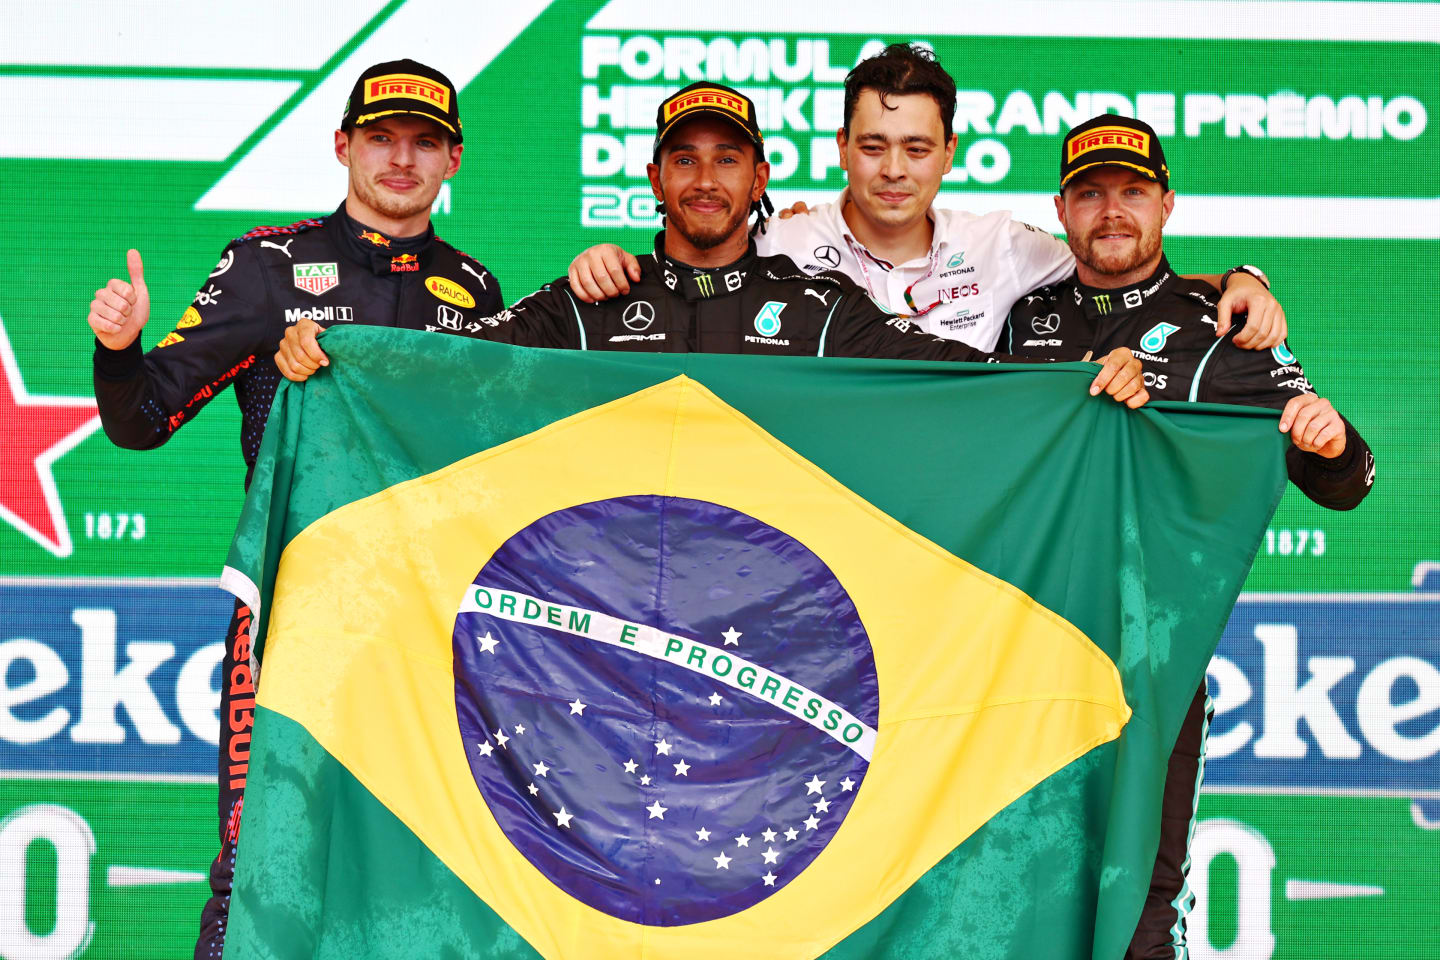 SAO PAULO, BRAZIL - NOVEMBER 14: Race winner Lewis Hamilton of Great Britain and Mercedes GP, second placed Max Verstappen of Netherlands and Red Bull Racing and third placed Valtteri Bottas of Finland and Mercedes GP celebrate on the podium during the F1 Grand Prix of Brazil at Autodromo Jose Carlos Pace on November 14, 2021 in Sao Paulo, Brazil. (Photo by Mark Thompson/Getty Images)